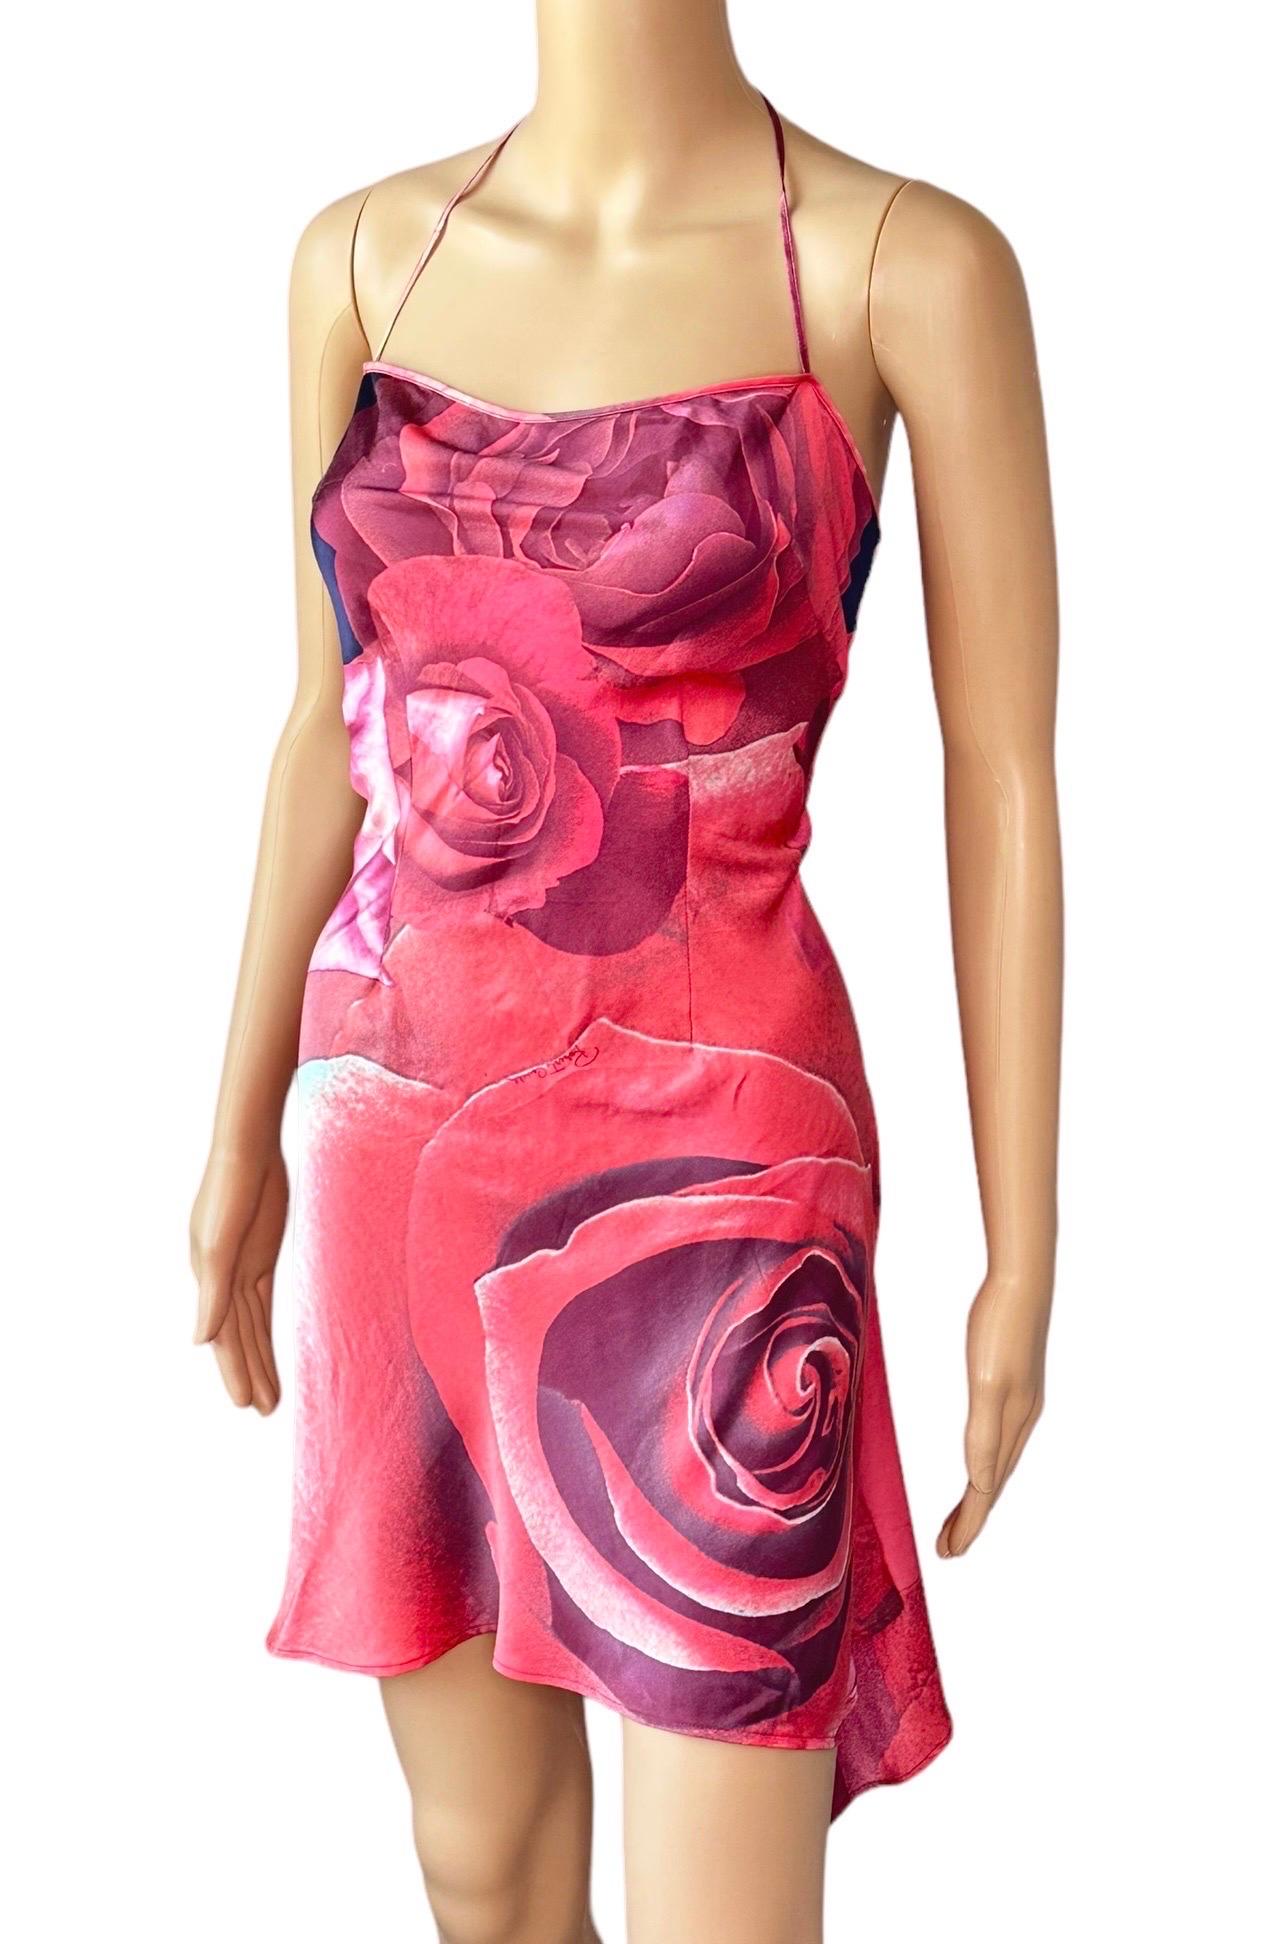 Roberto Cavalli S/S 2000 Rose Floral Print Slip Asymmetric Mini Dress Size M

Please note this dress was professionally altered to fit the body better (Please see last picture). These adjustments can easily be taken out by a professional seamstress